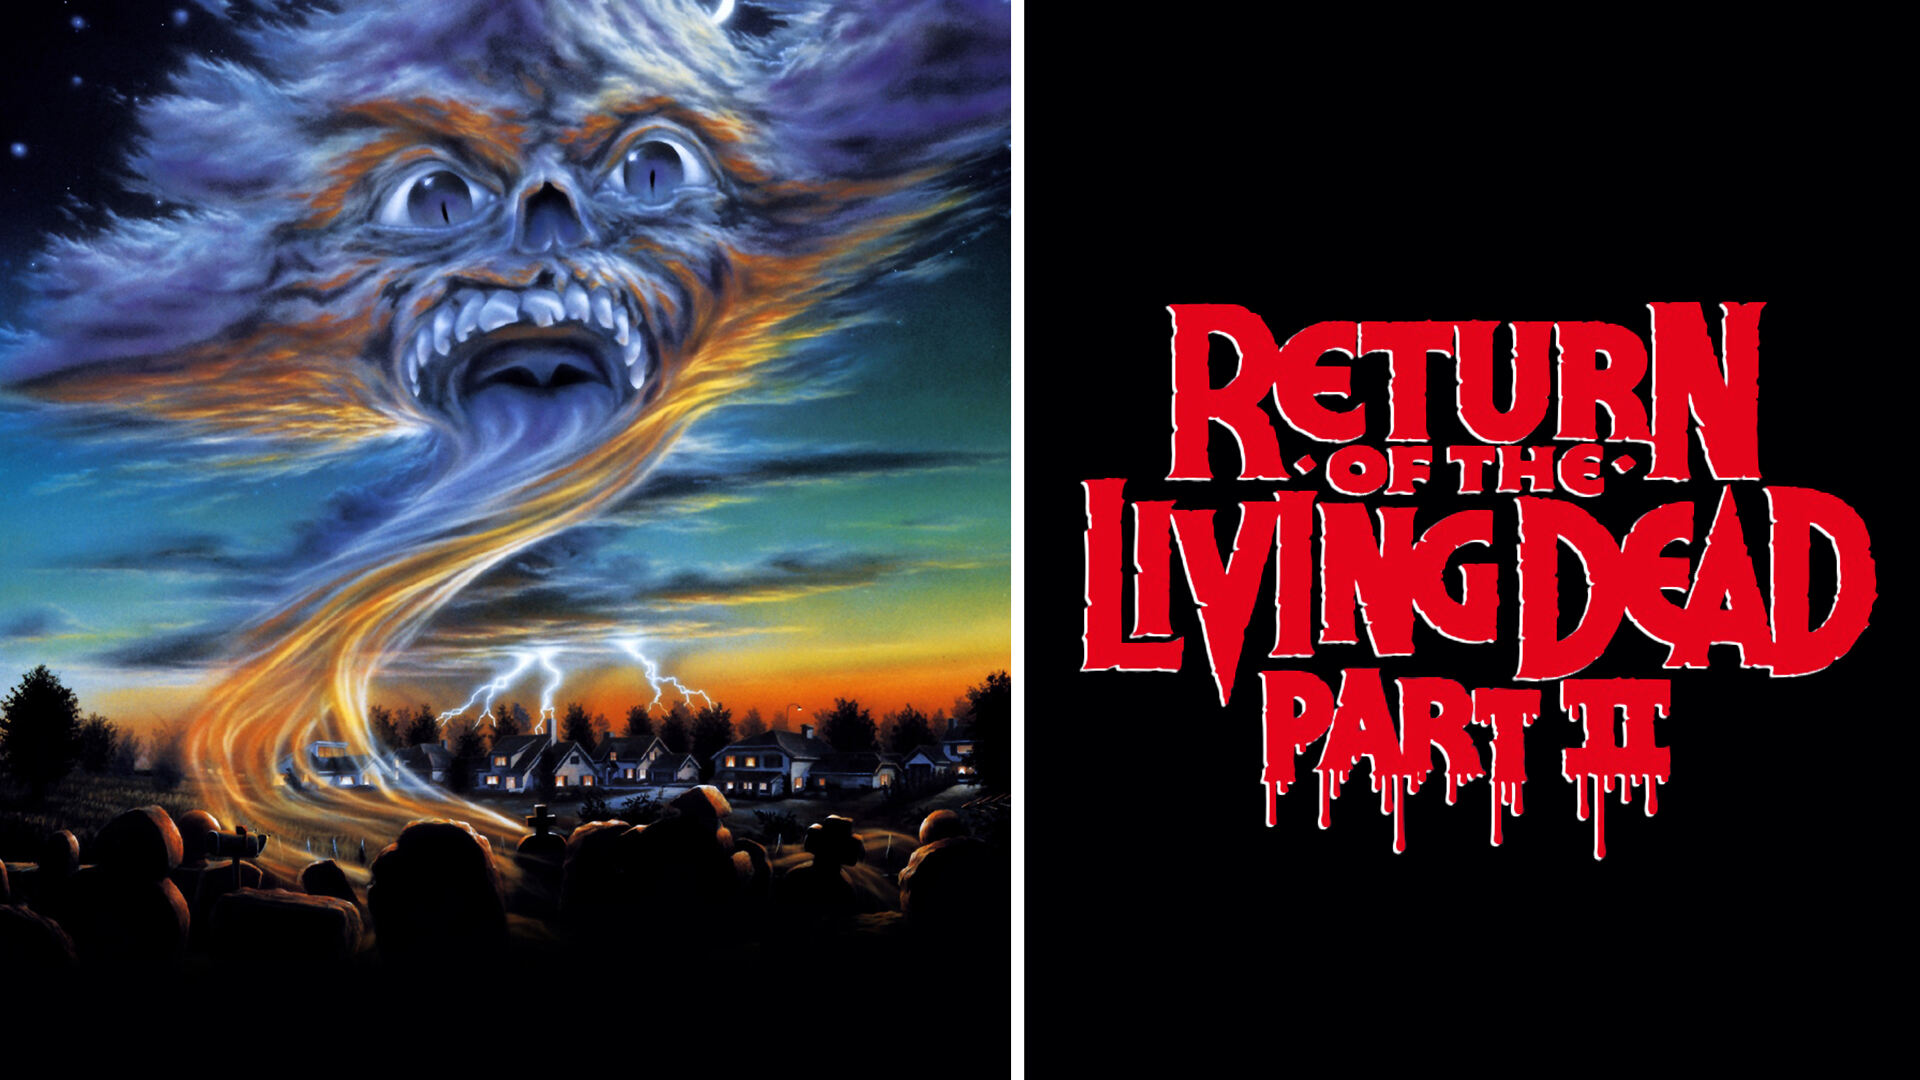 43-facts-about-the-movie-return-of-the-living-dead-part-ii